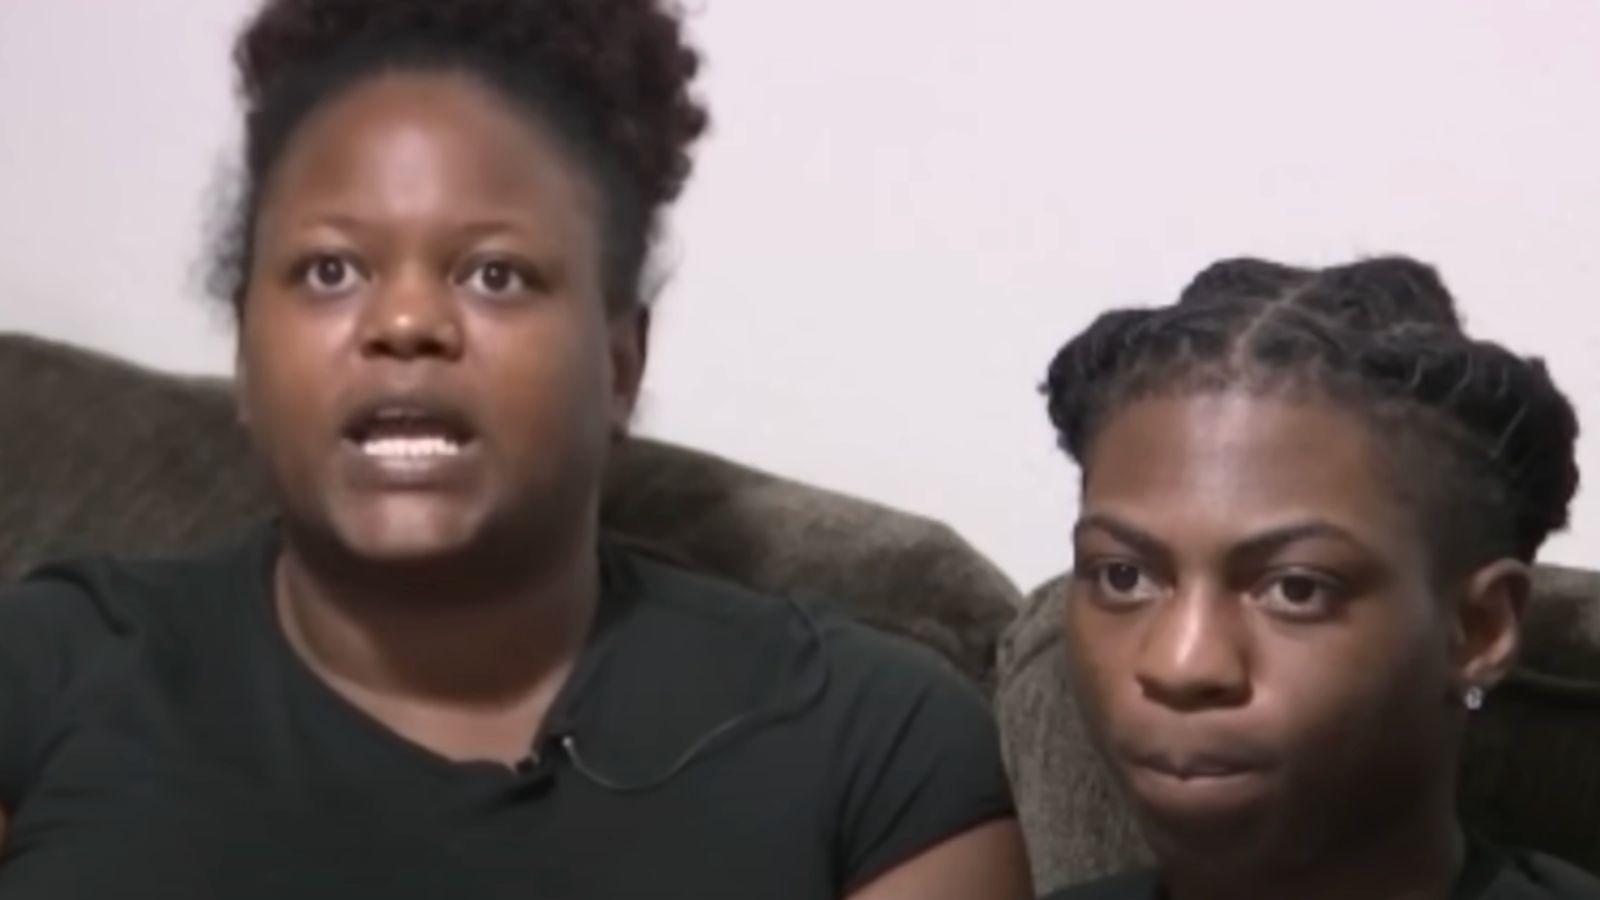 Texas family sues school over hairstyle suspension